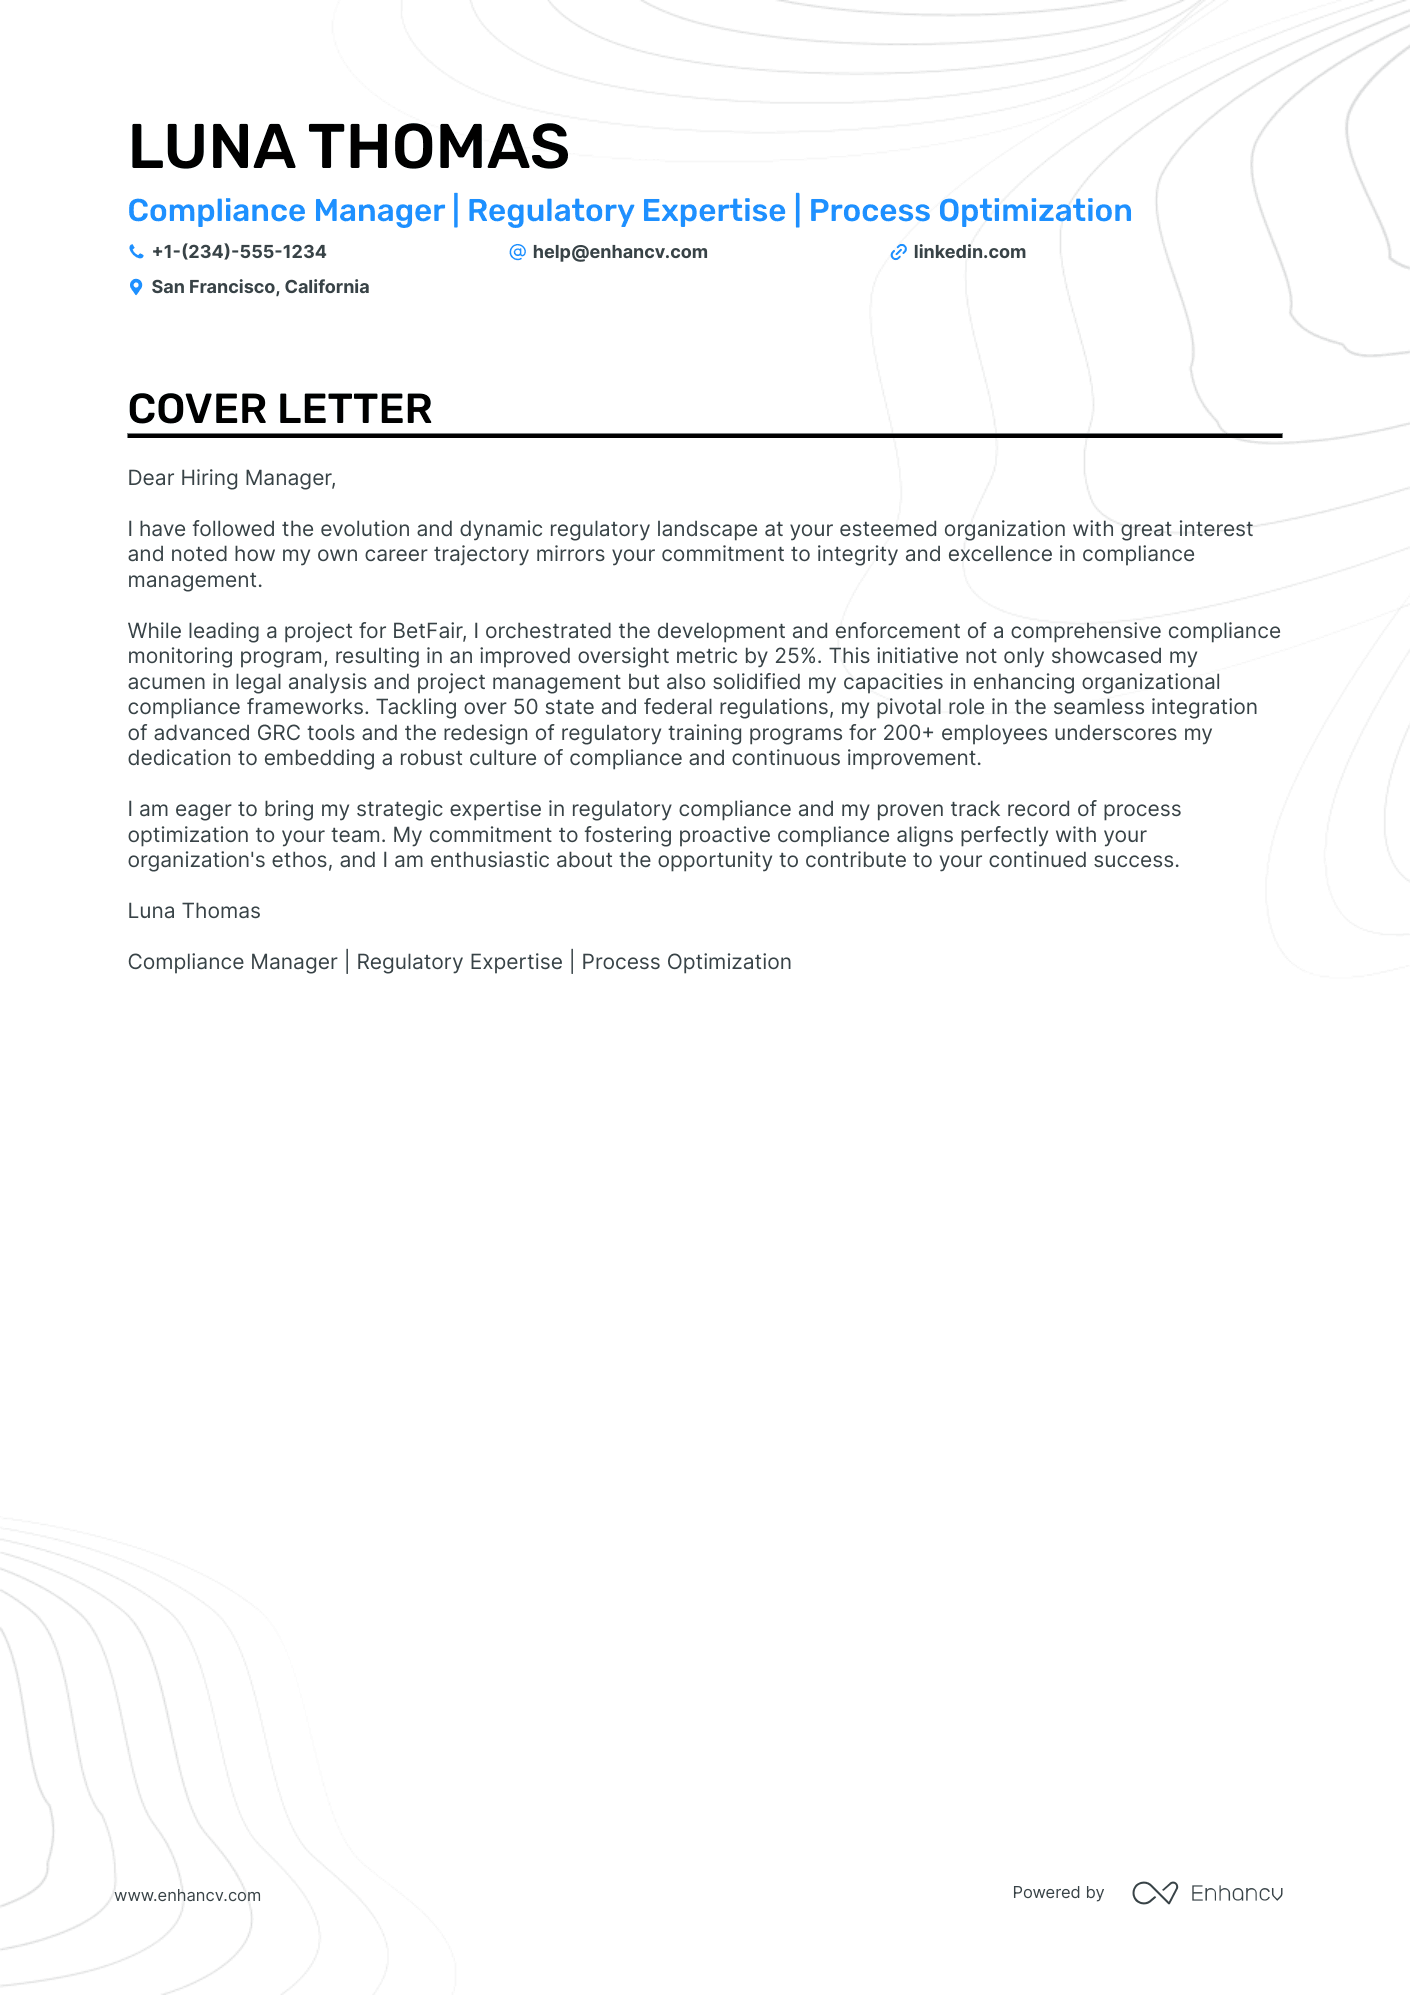 Compliance Manager cover letter